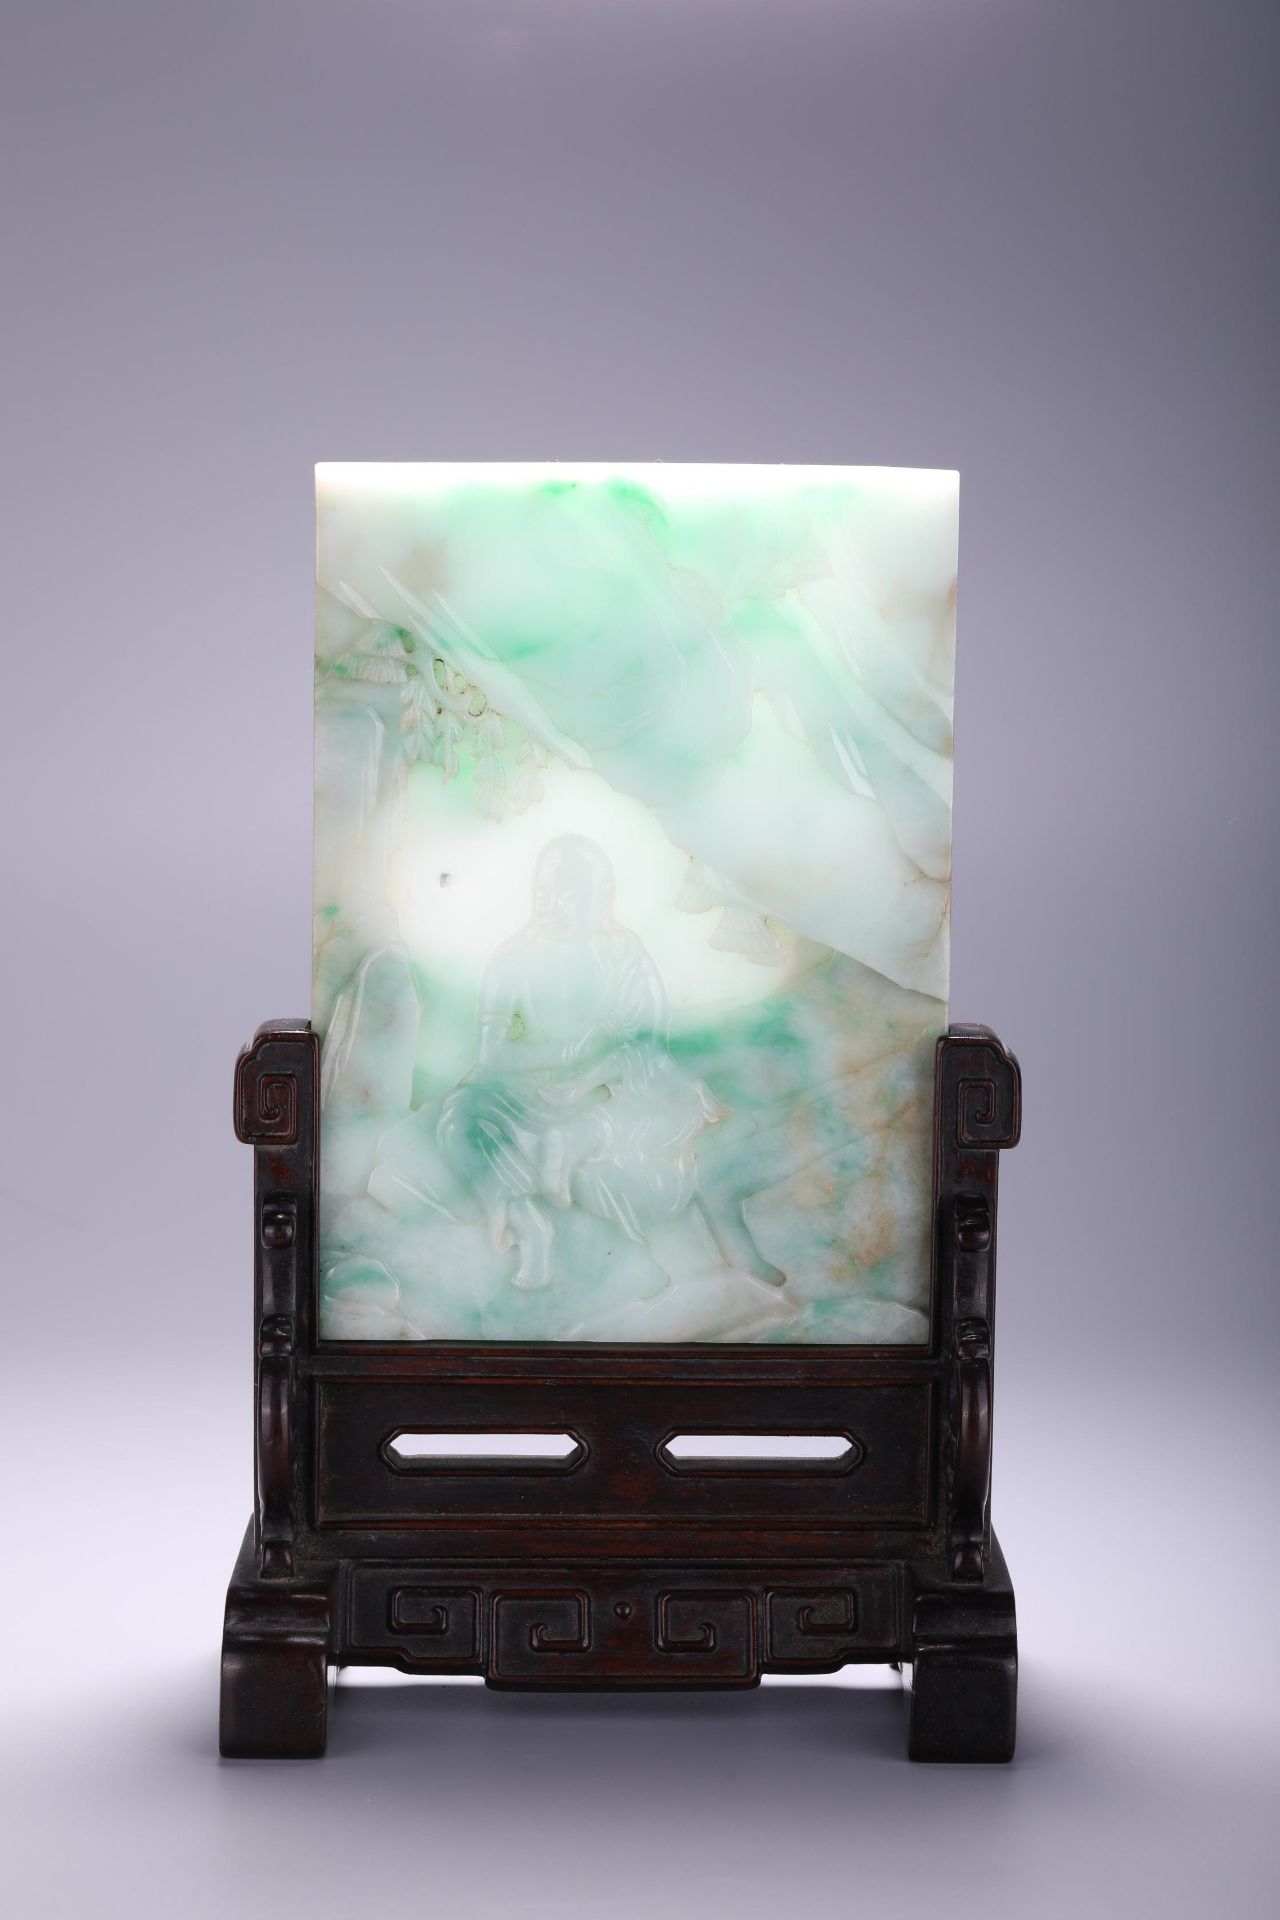 A Chinese carved jadeite feicui jade plaque fitted in a wooden stand, L 16 - W 11,9 - Depth 1 cm